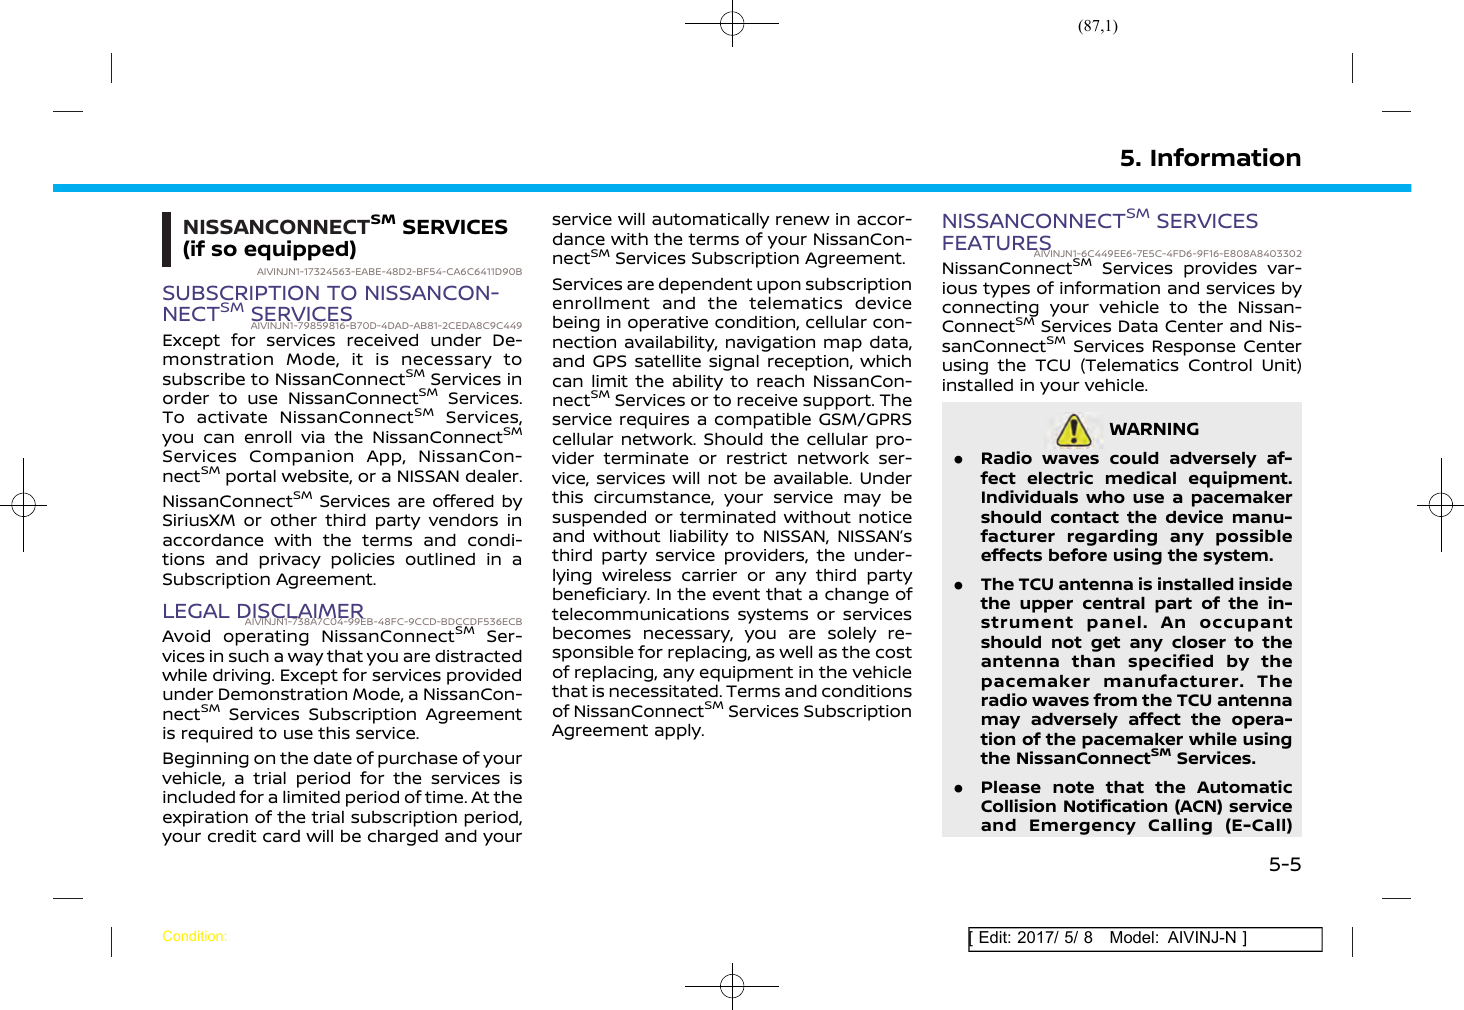 Page 87 of Robert Bosch Car Multimedia AIVICMFB0 Navigation System with Bluetooth and WLAN User Manual